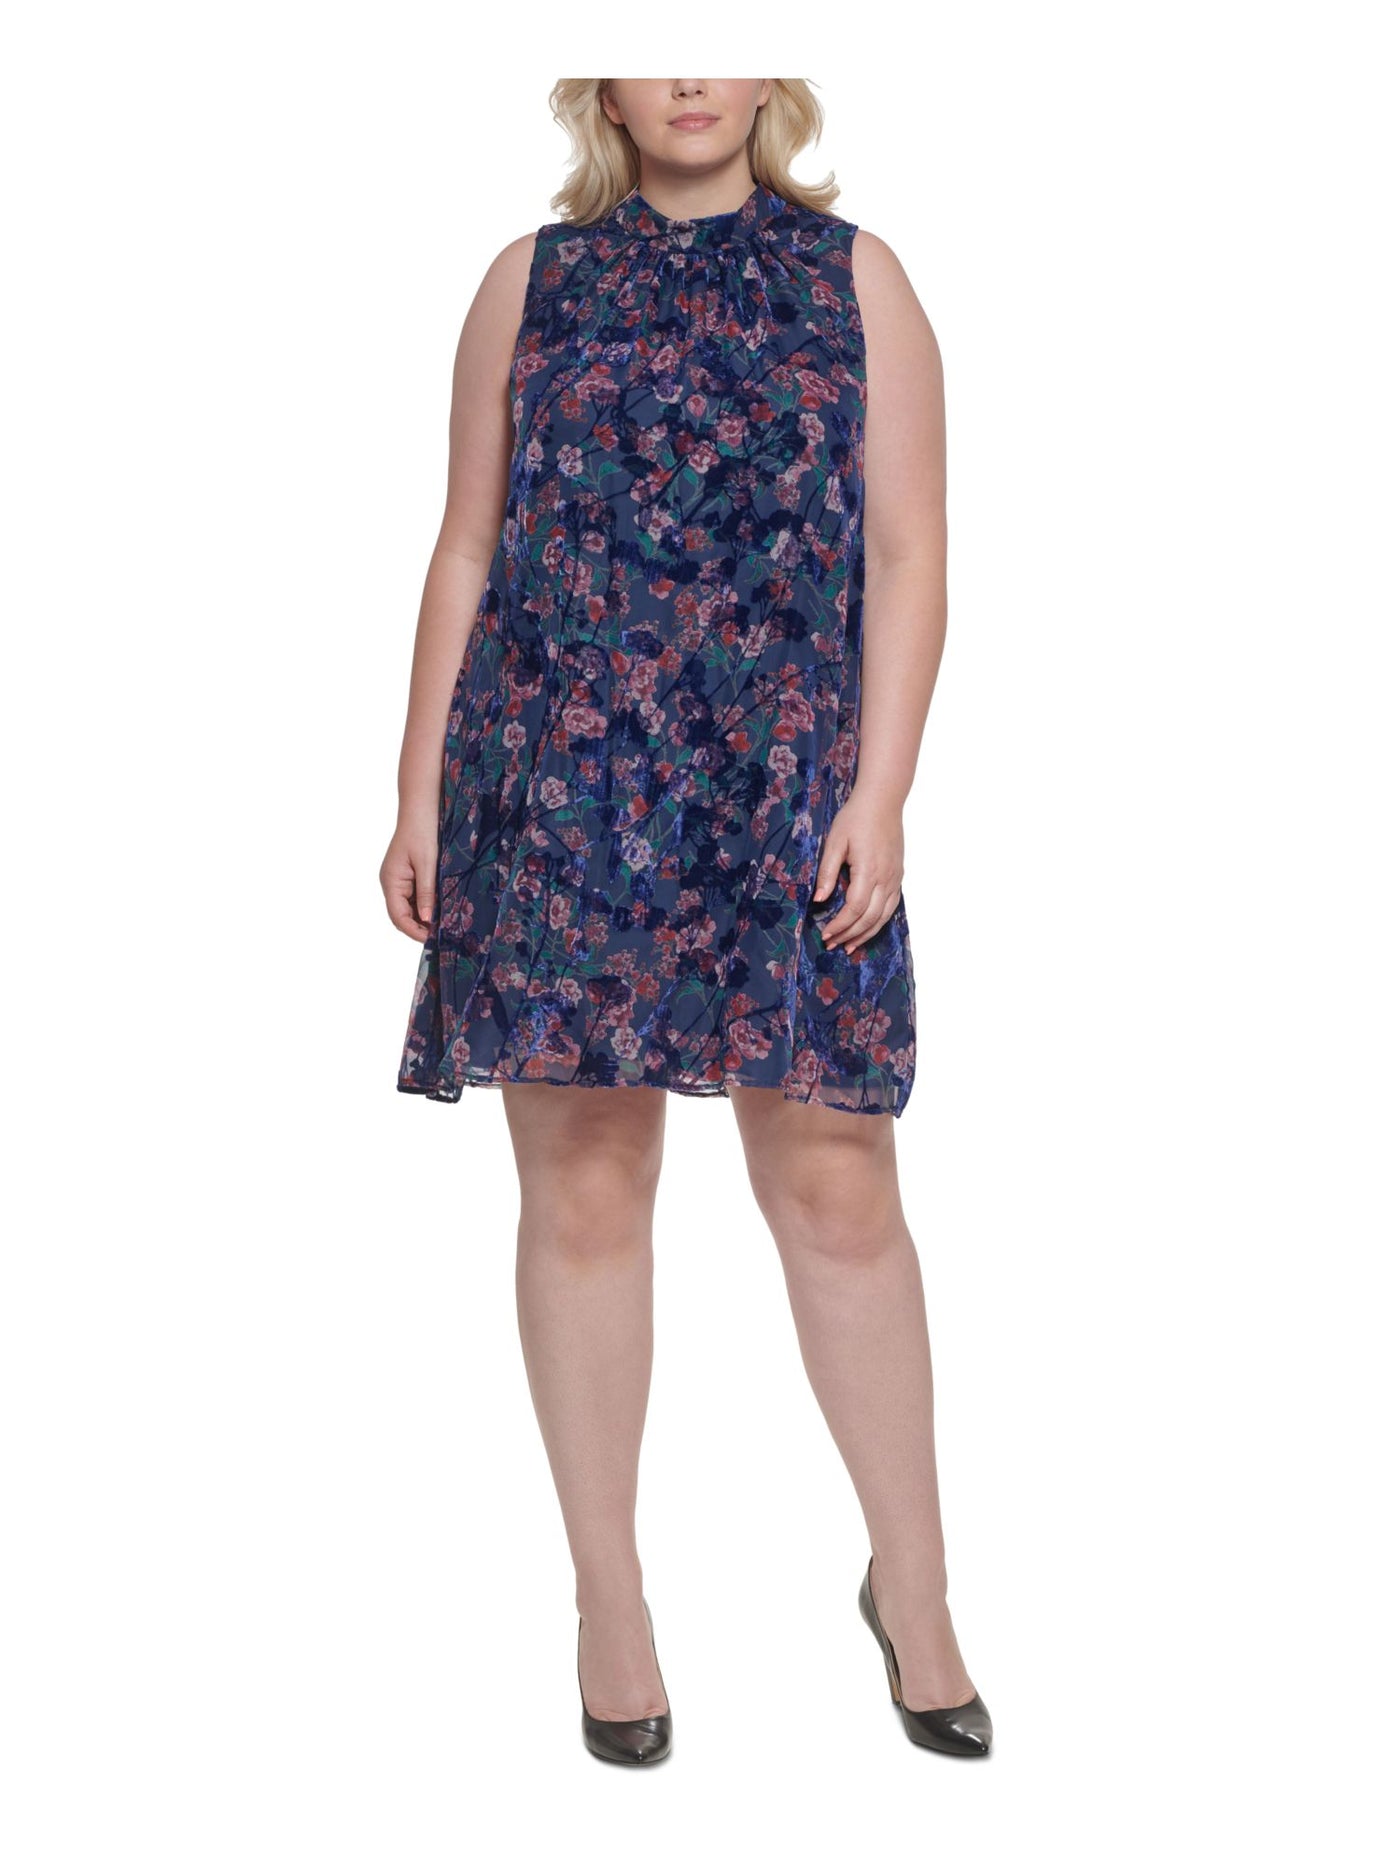 TOMMY HILFIGER Womens Navy Sheer Mixed Media Floral Sleeveless Mock Neck Above The Knee Shift Dress Plus 20W